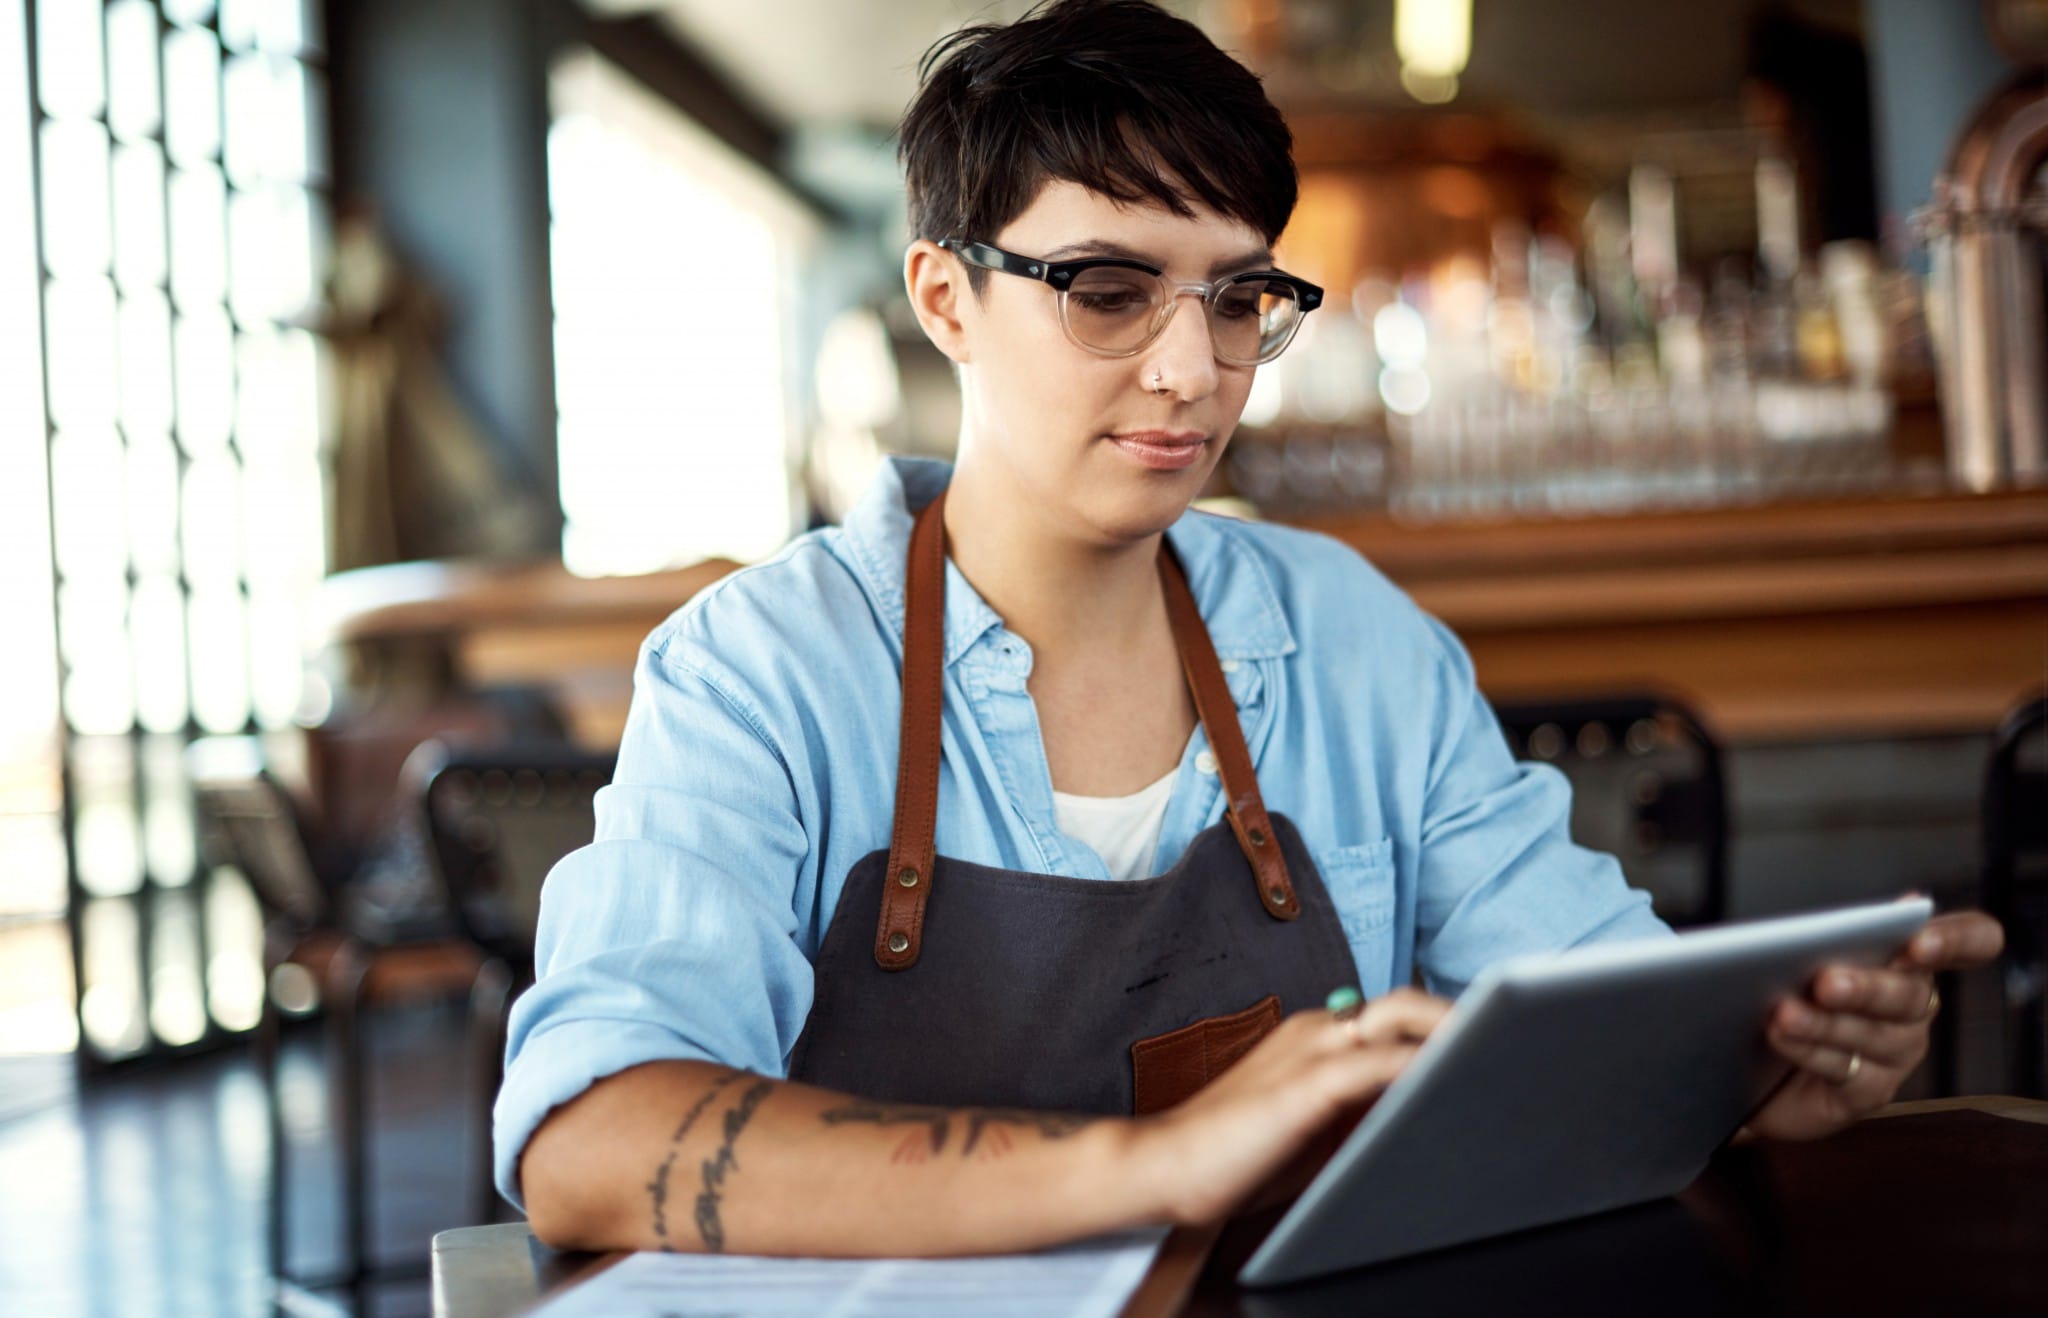 A woman working in a restaurant takes inventory on a tablet.